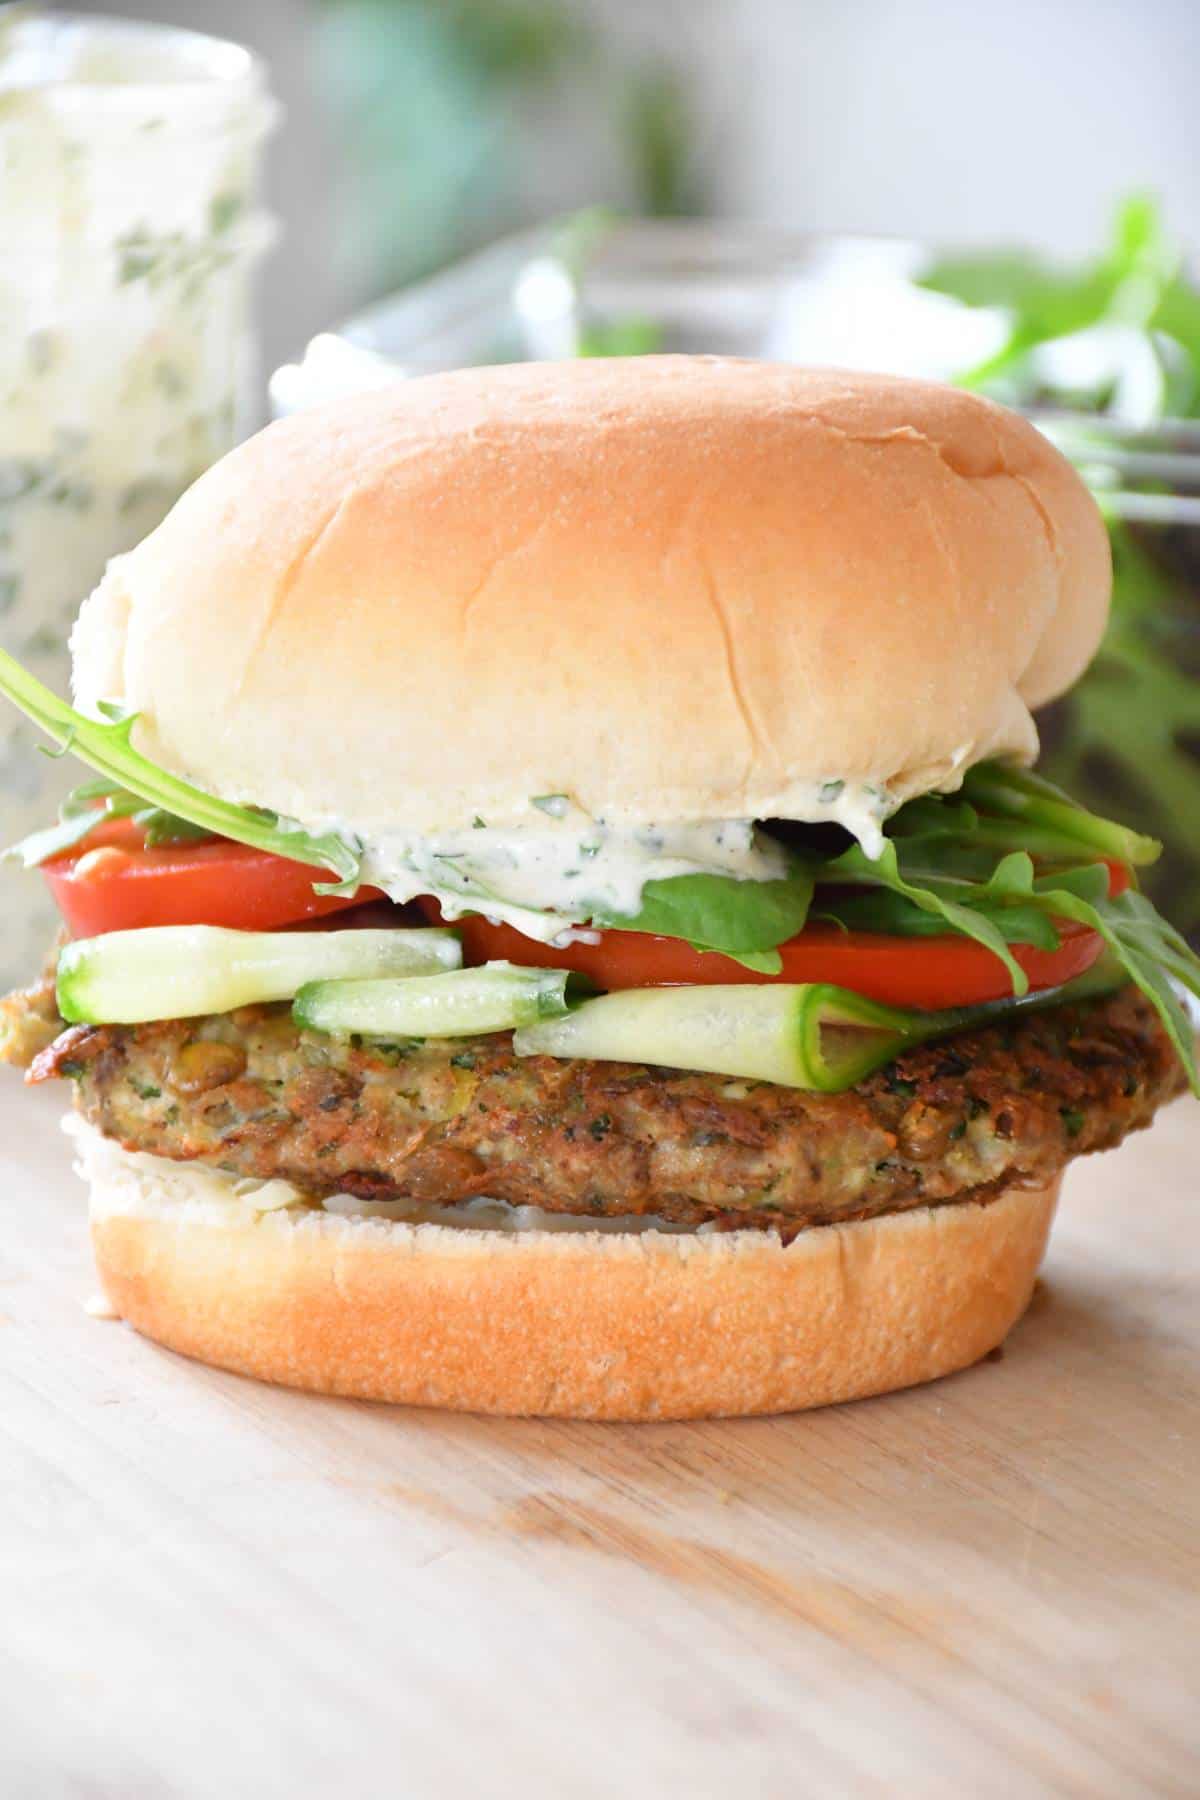 Low sodium cilantro pork burger cooked with lentils and fresh ingredients.